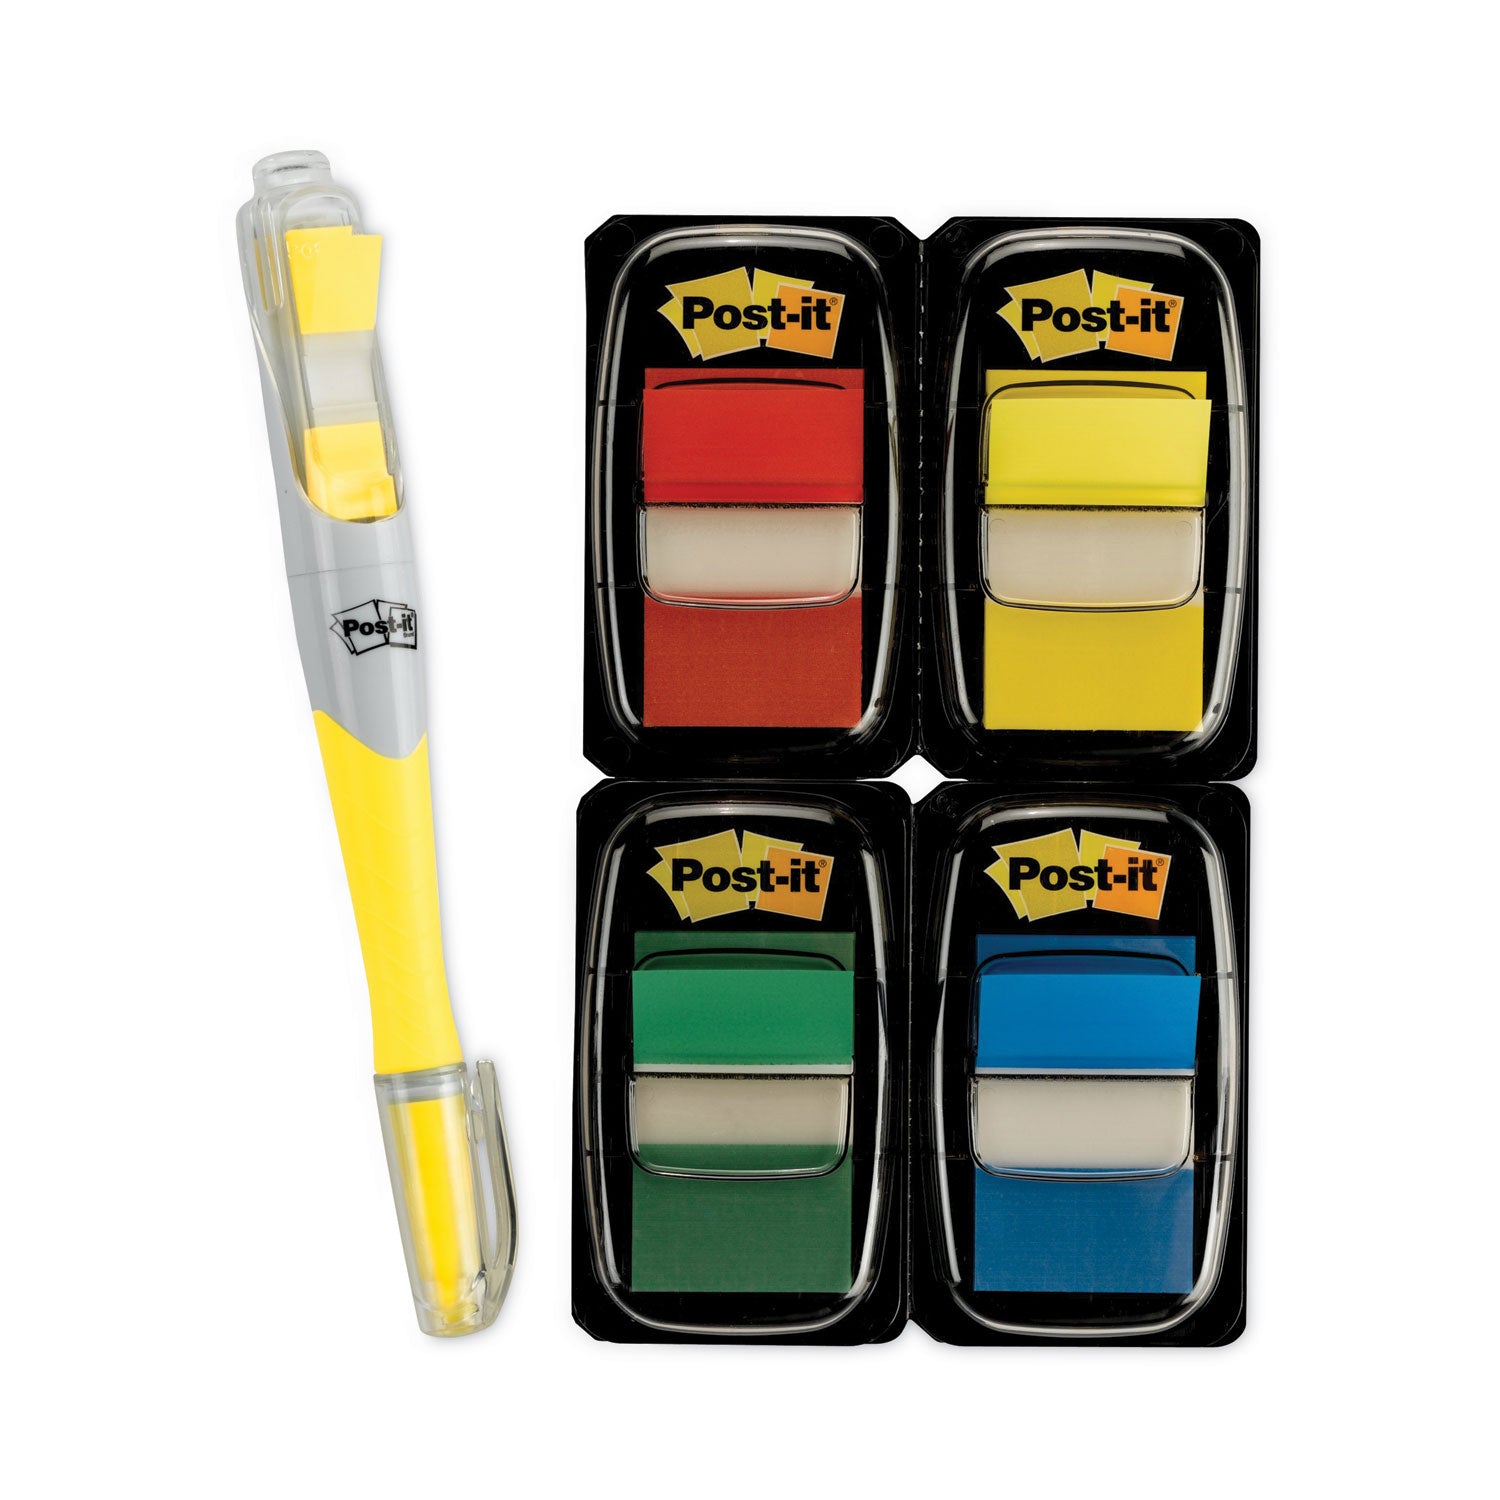 Page Flag Value Pack, Assorted, 200 1" Flags + Highlighter with 50 0.5" Flags - 